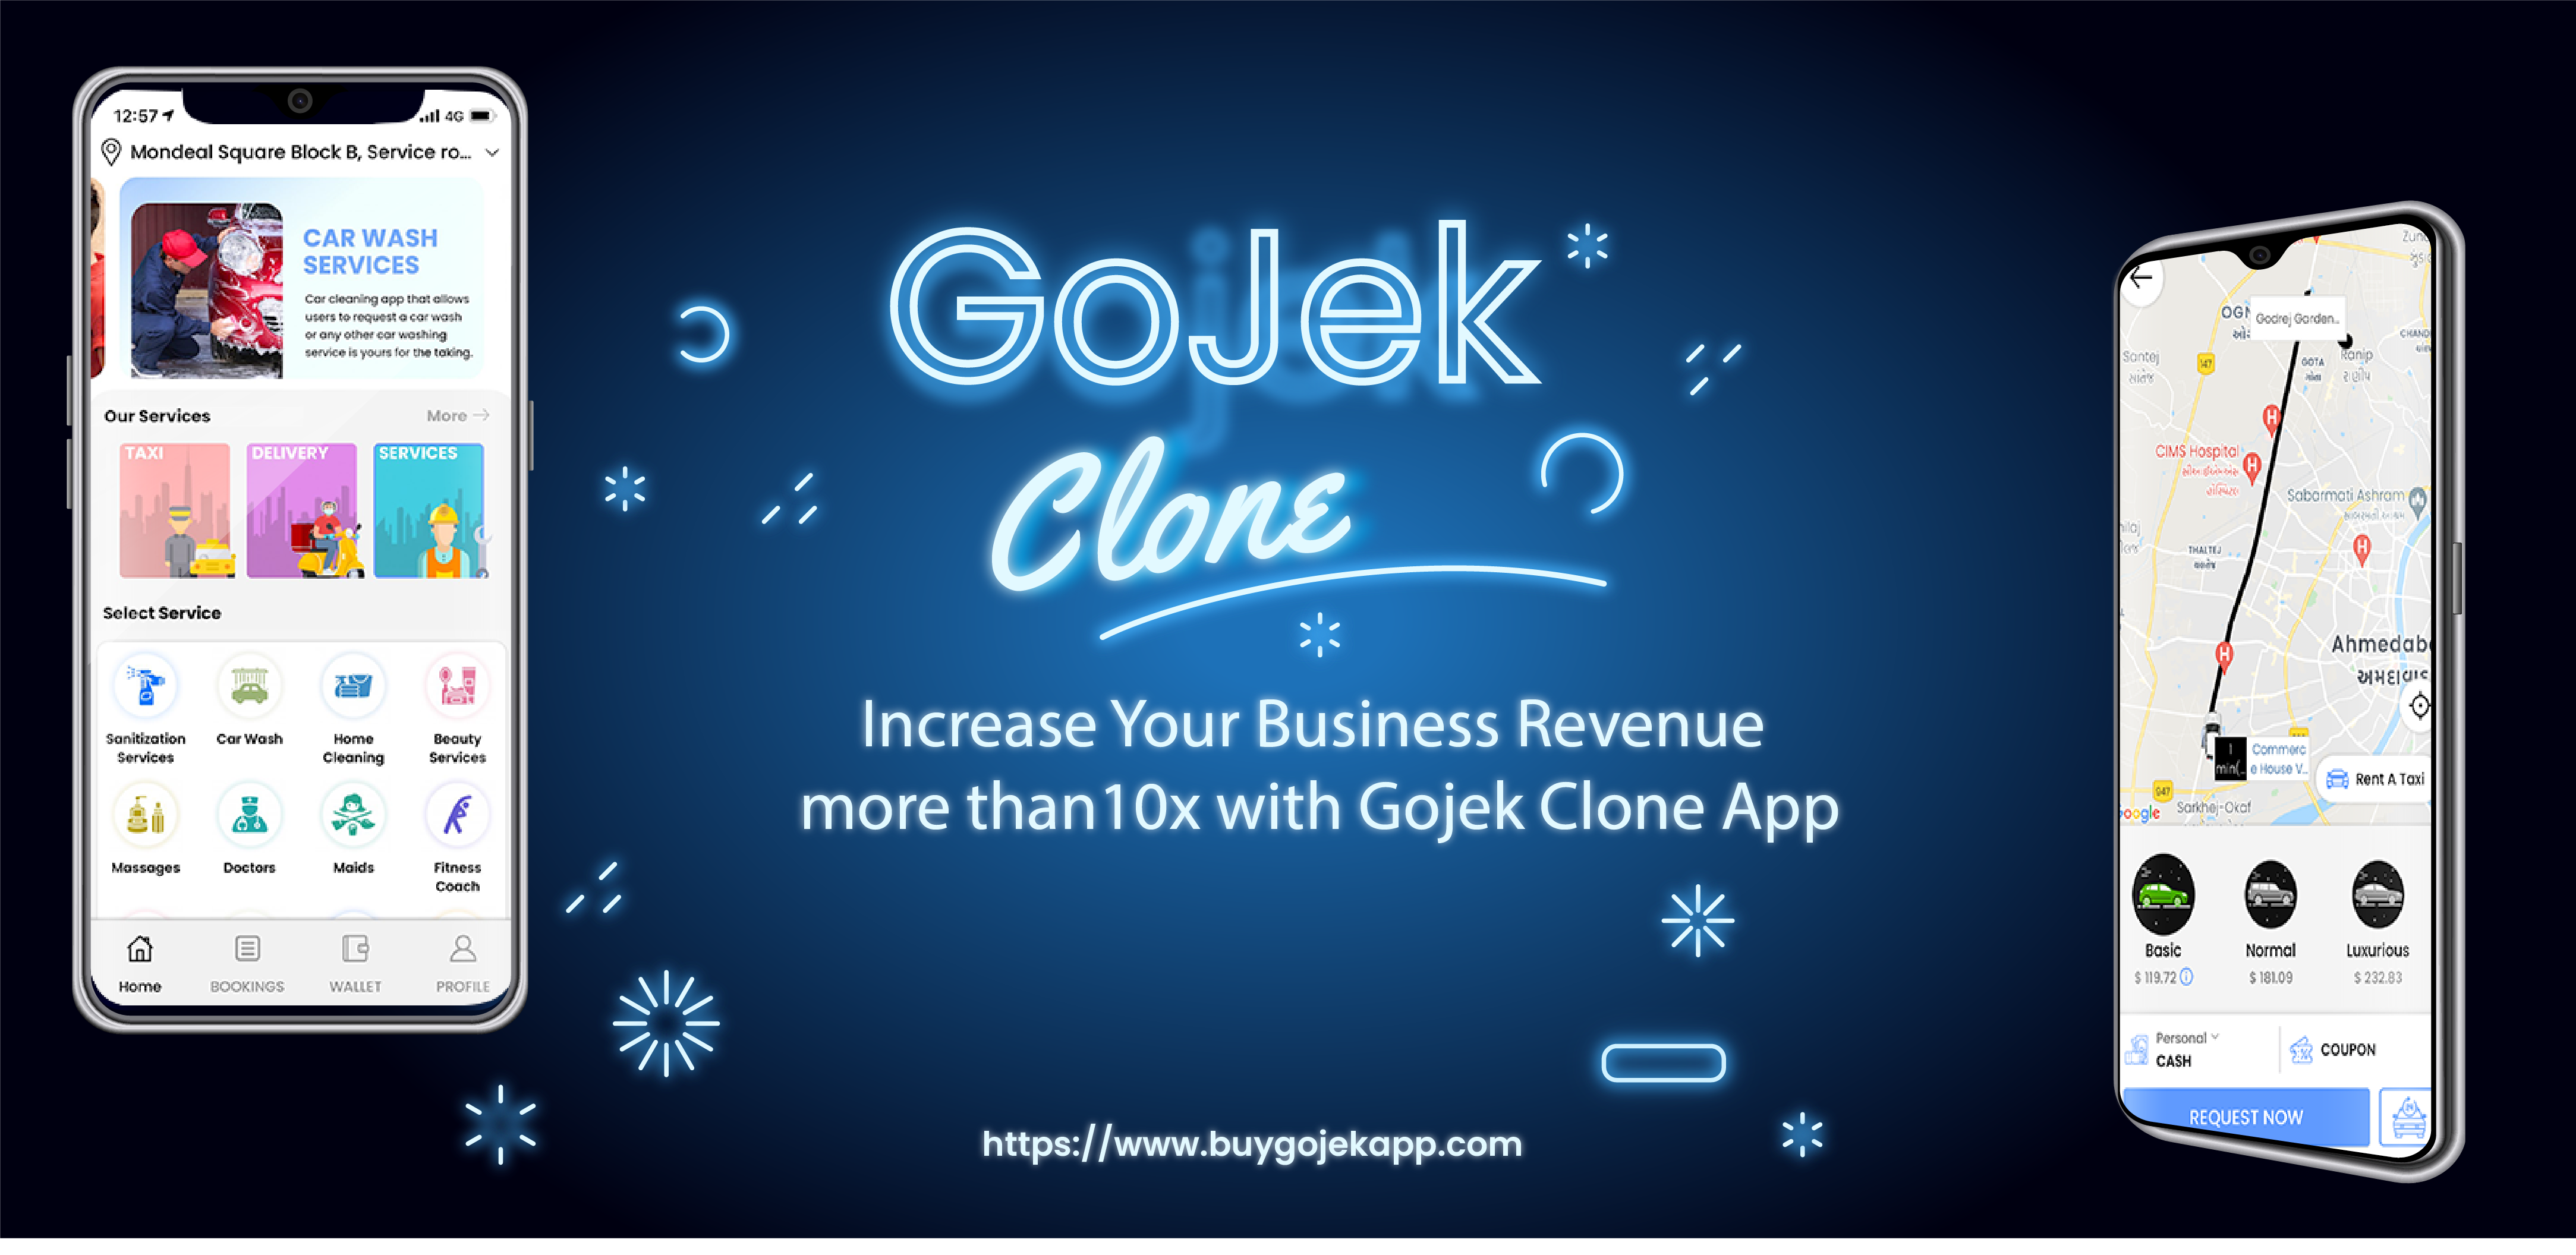 Gojek Clone Mobile App Development Trends To Follow In Indonesia In The Year 2022